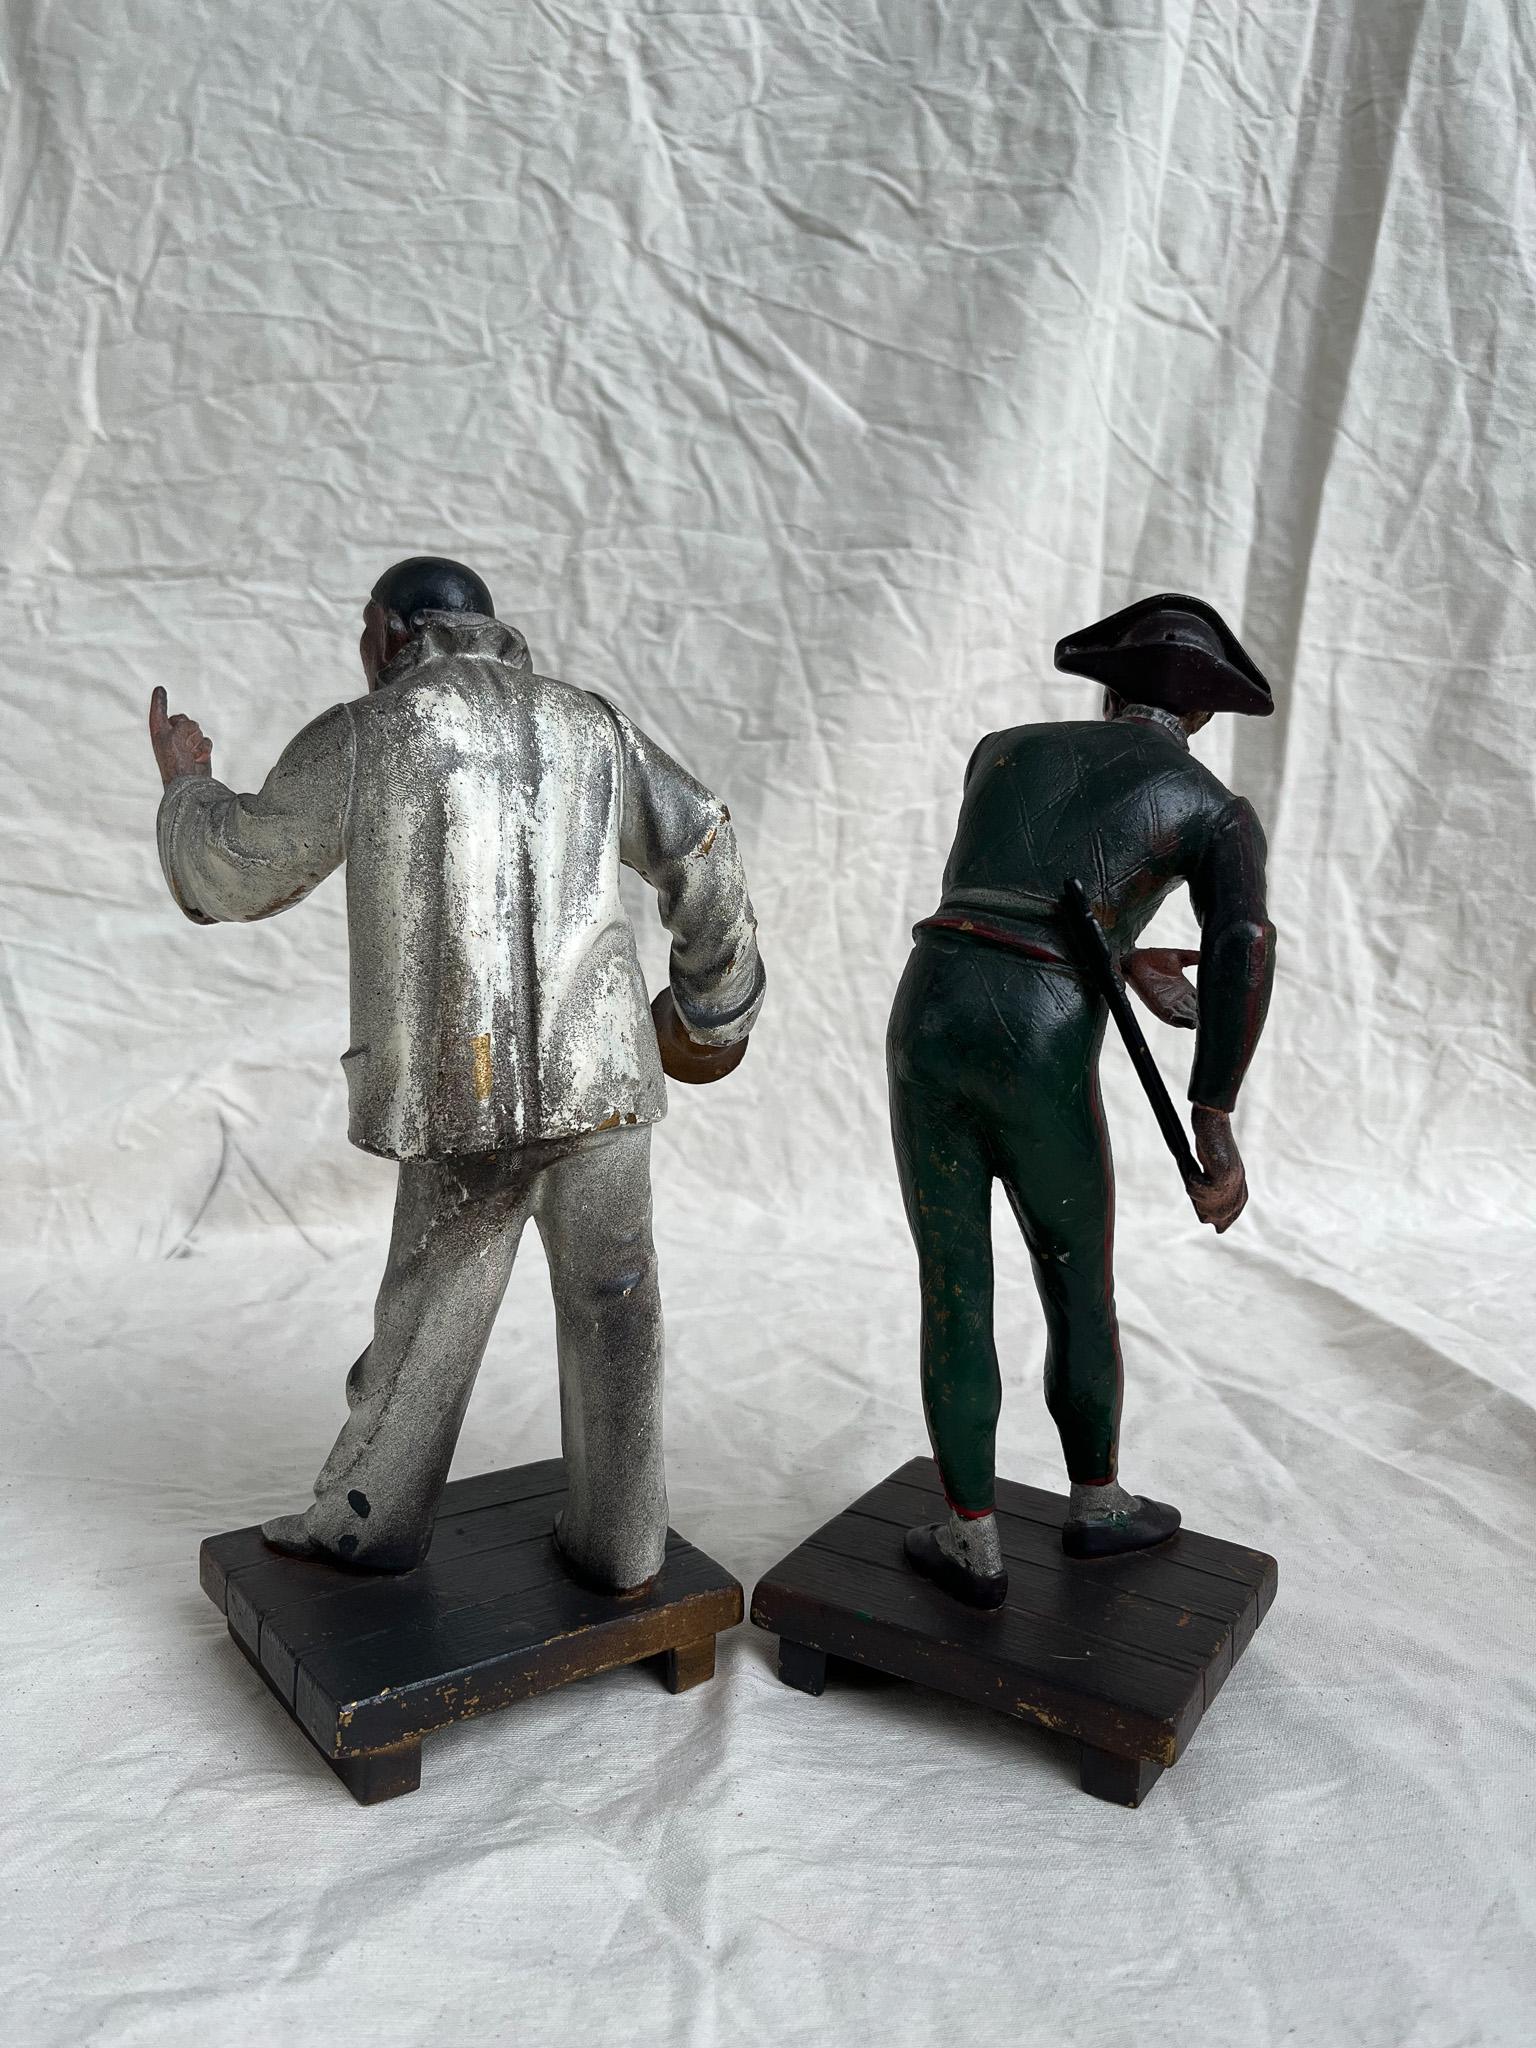 Pair of metal figures. Pierrot and Pantaleon. 19th century France.